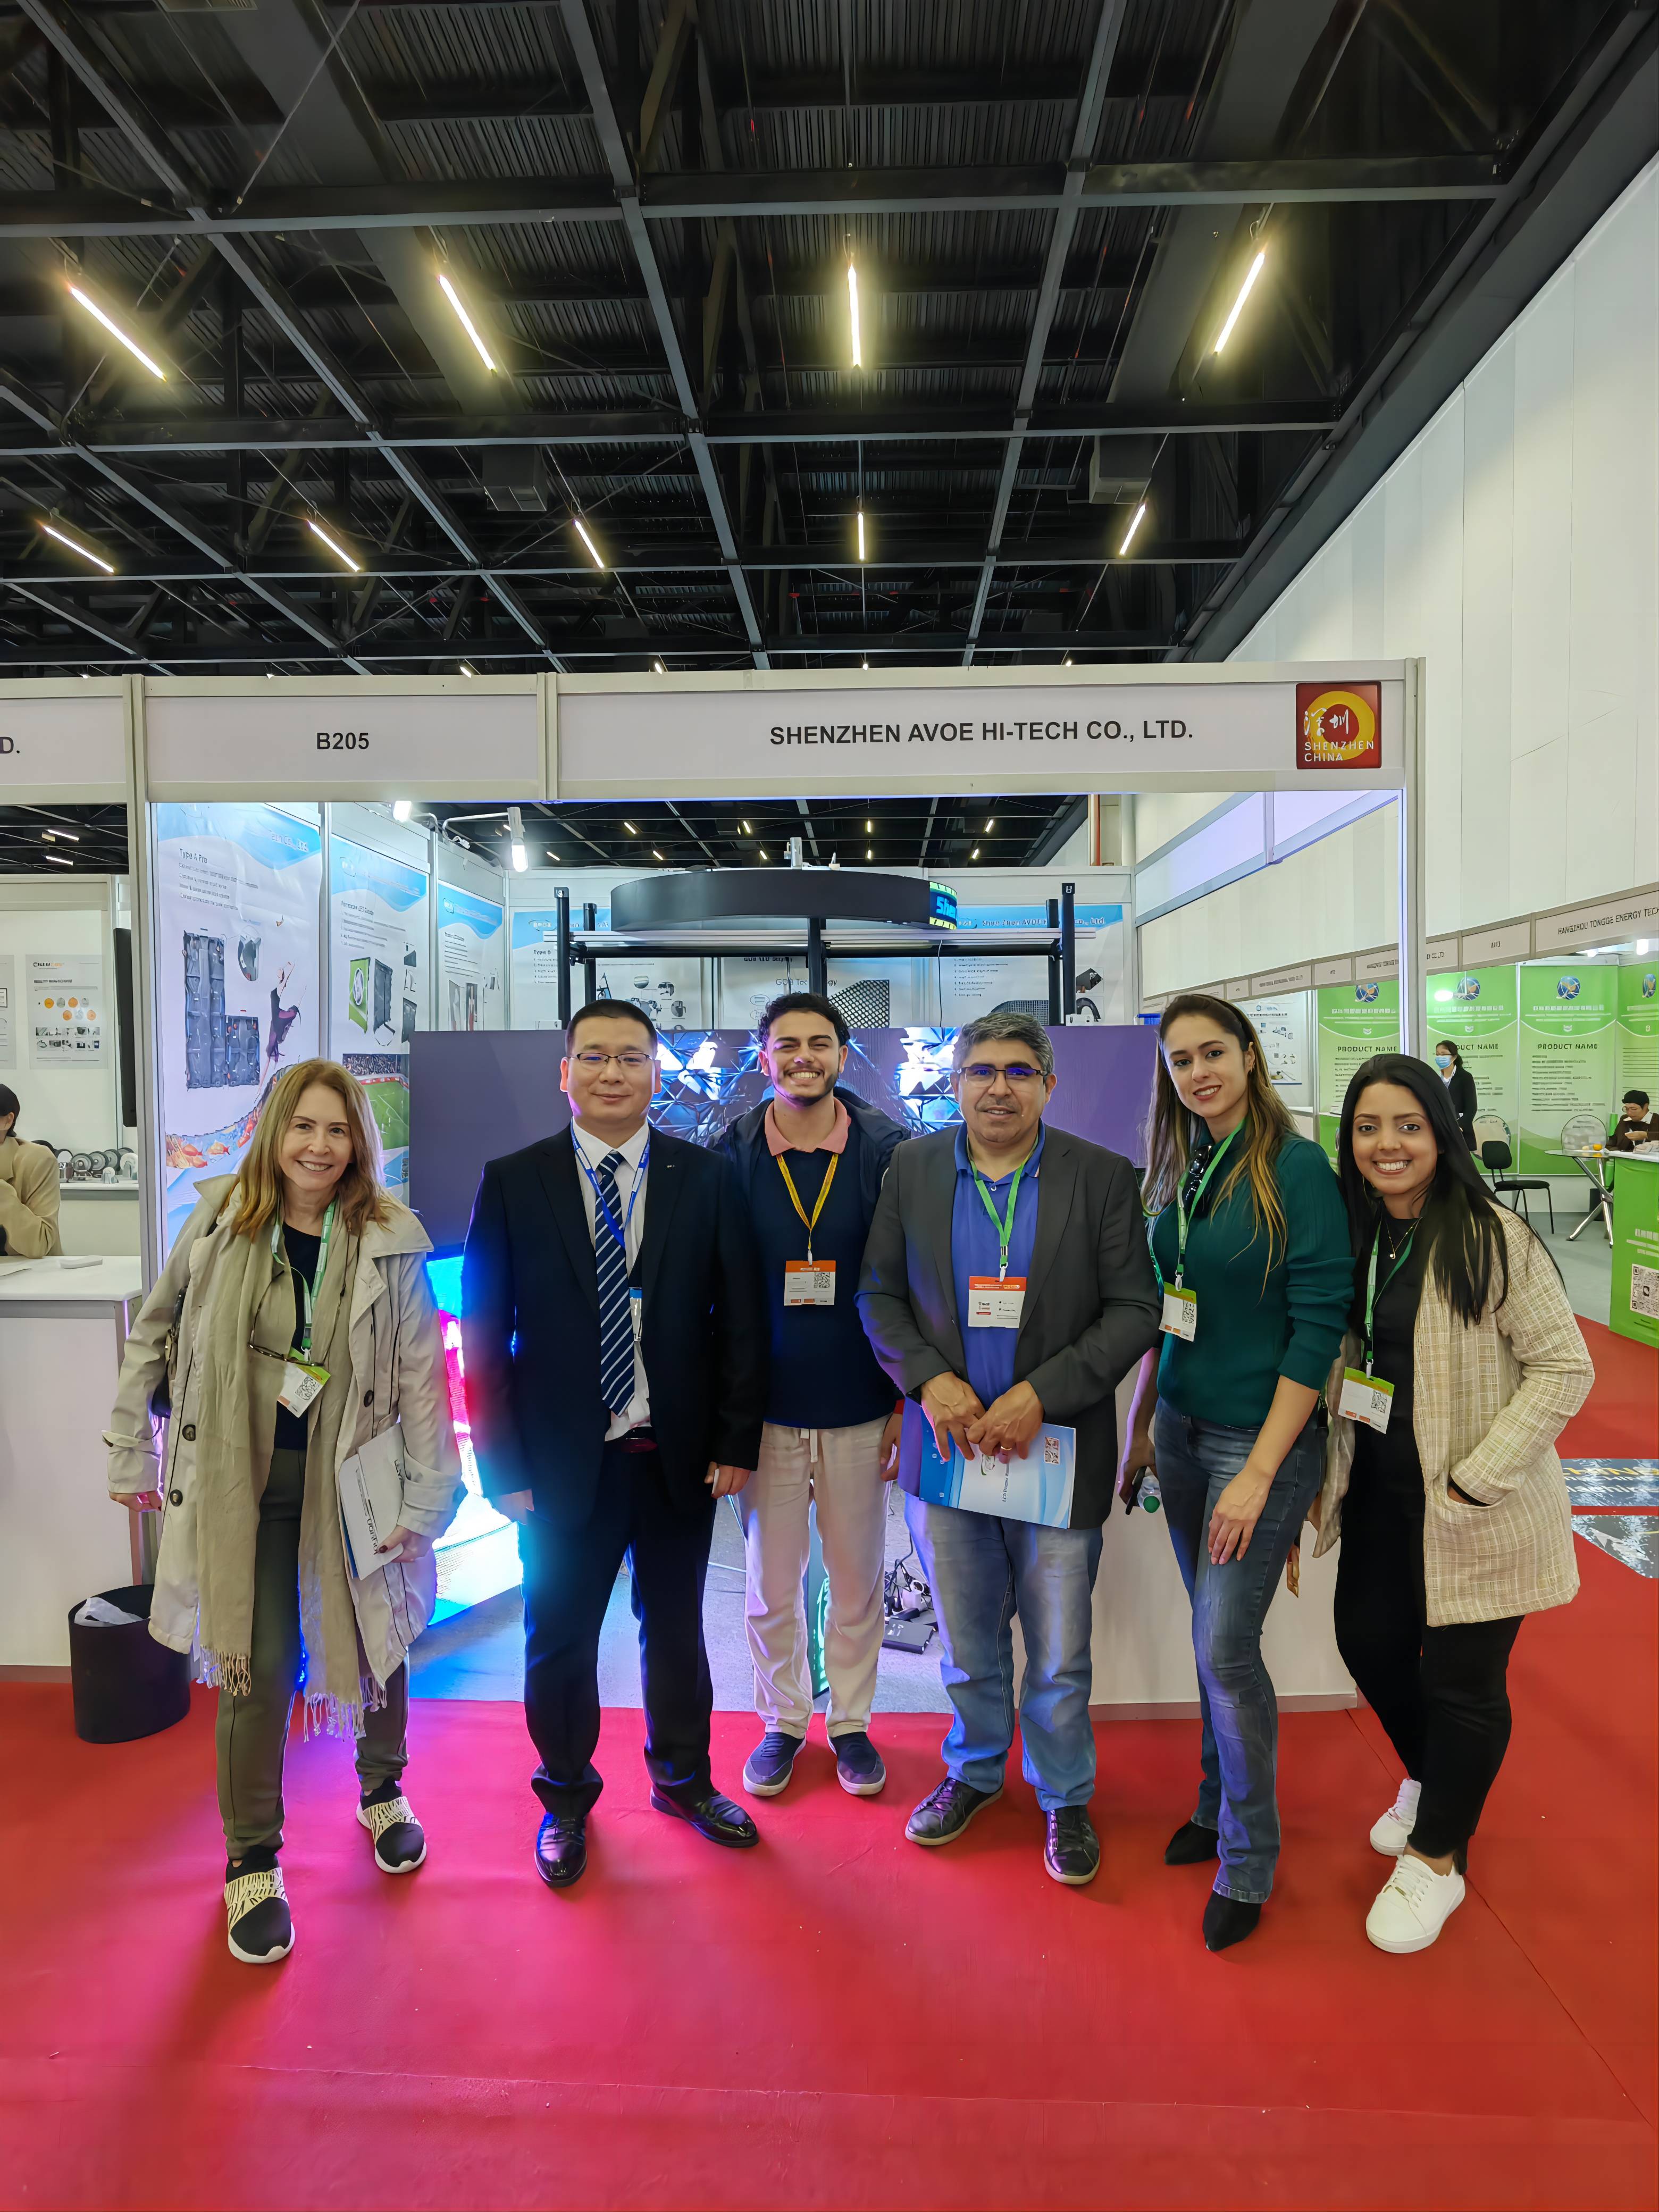 The exhibition in Brazil was successfully completed